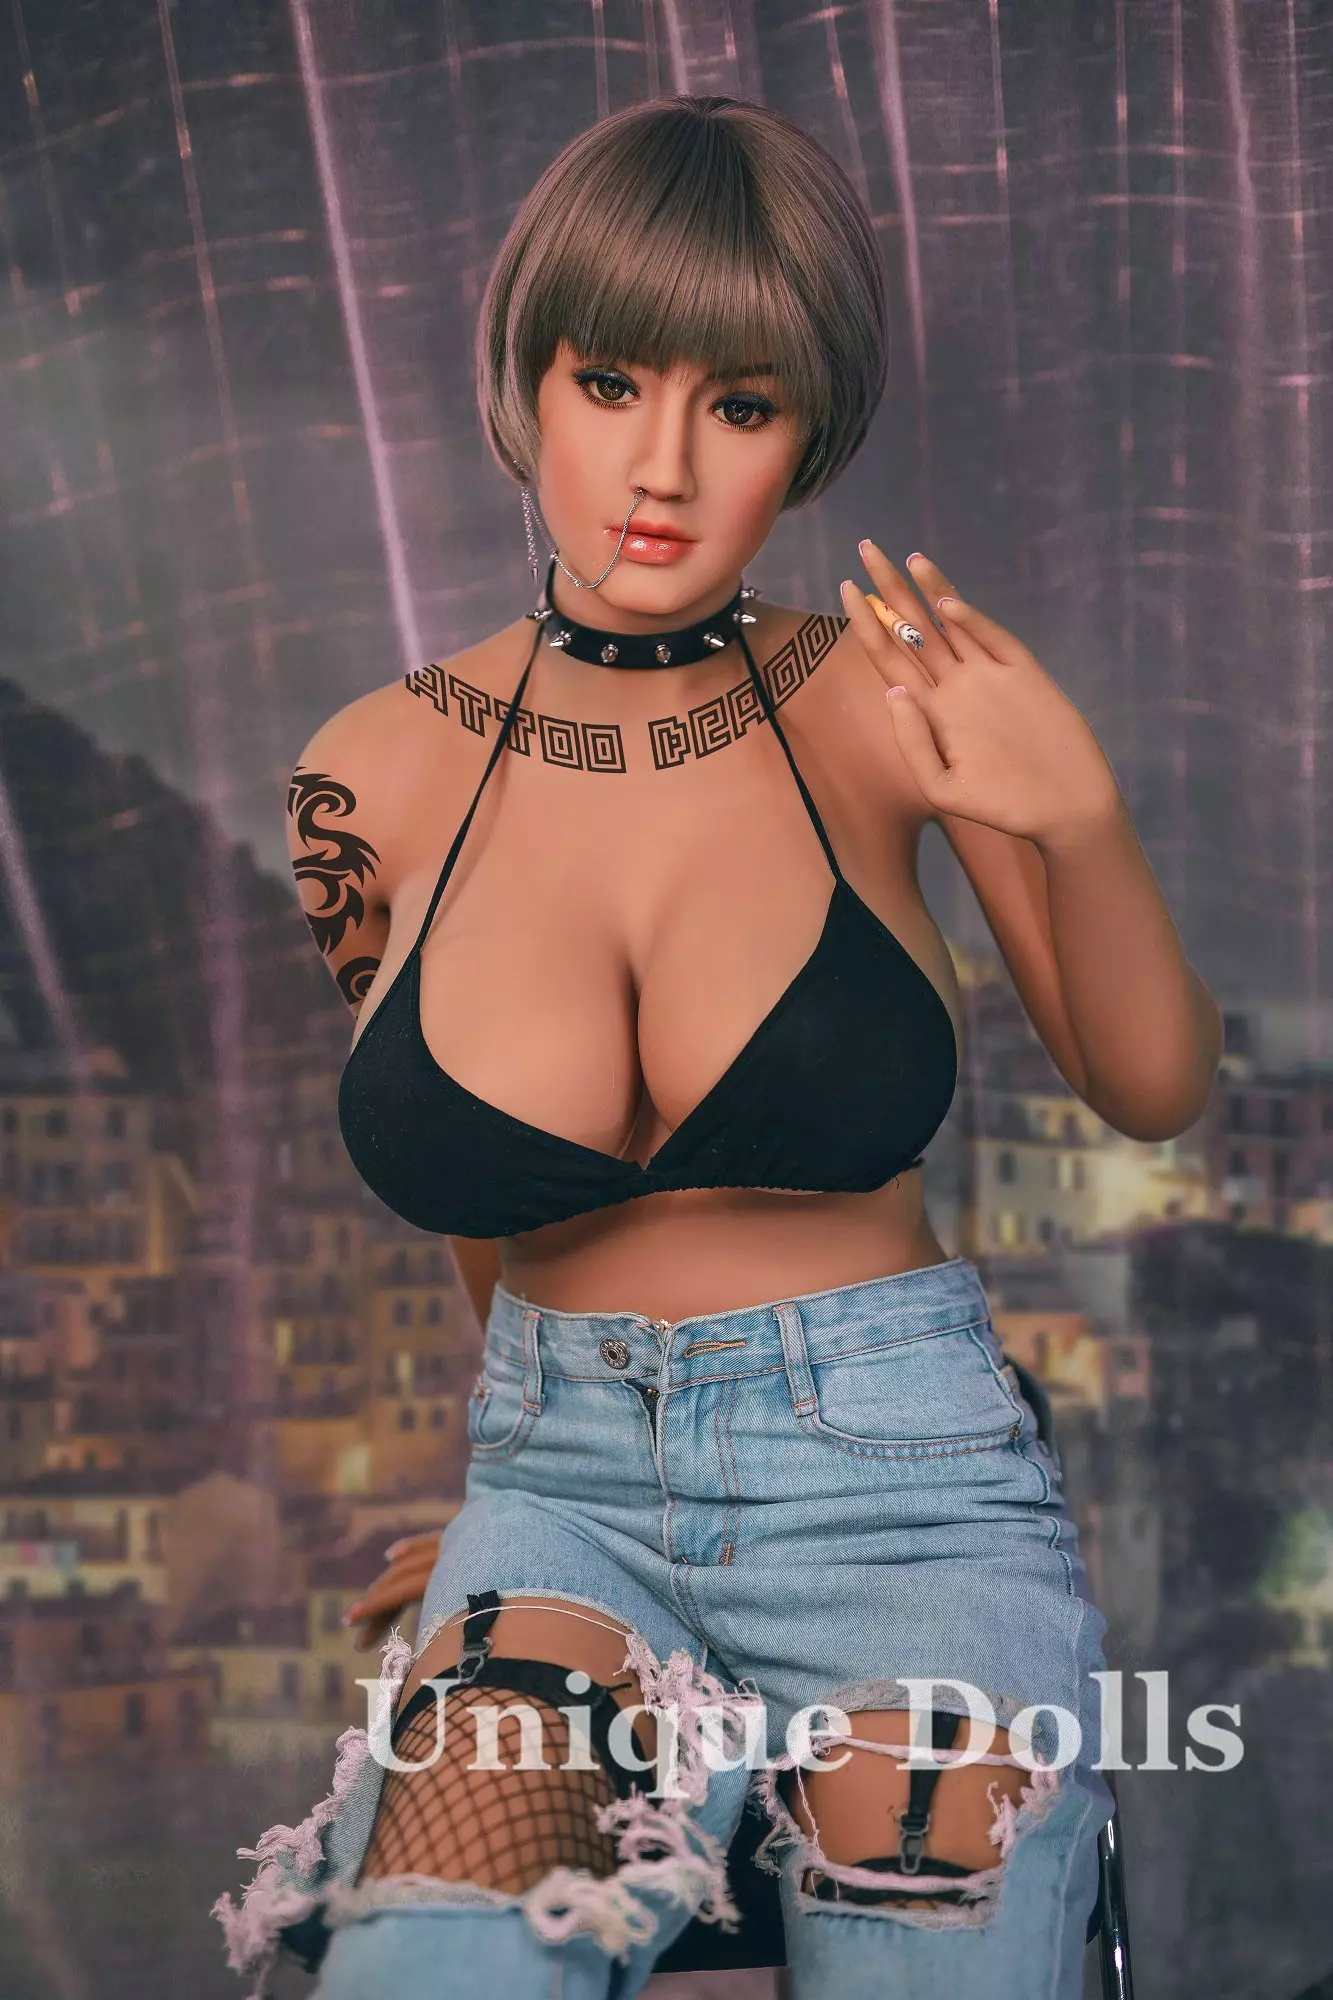 YL_Fronde sex doll